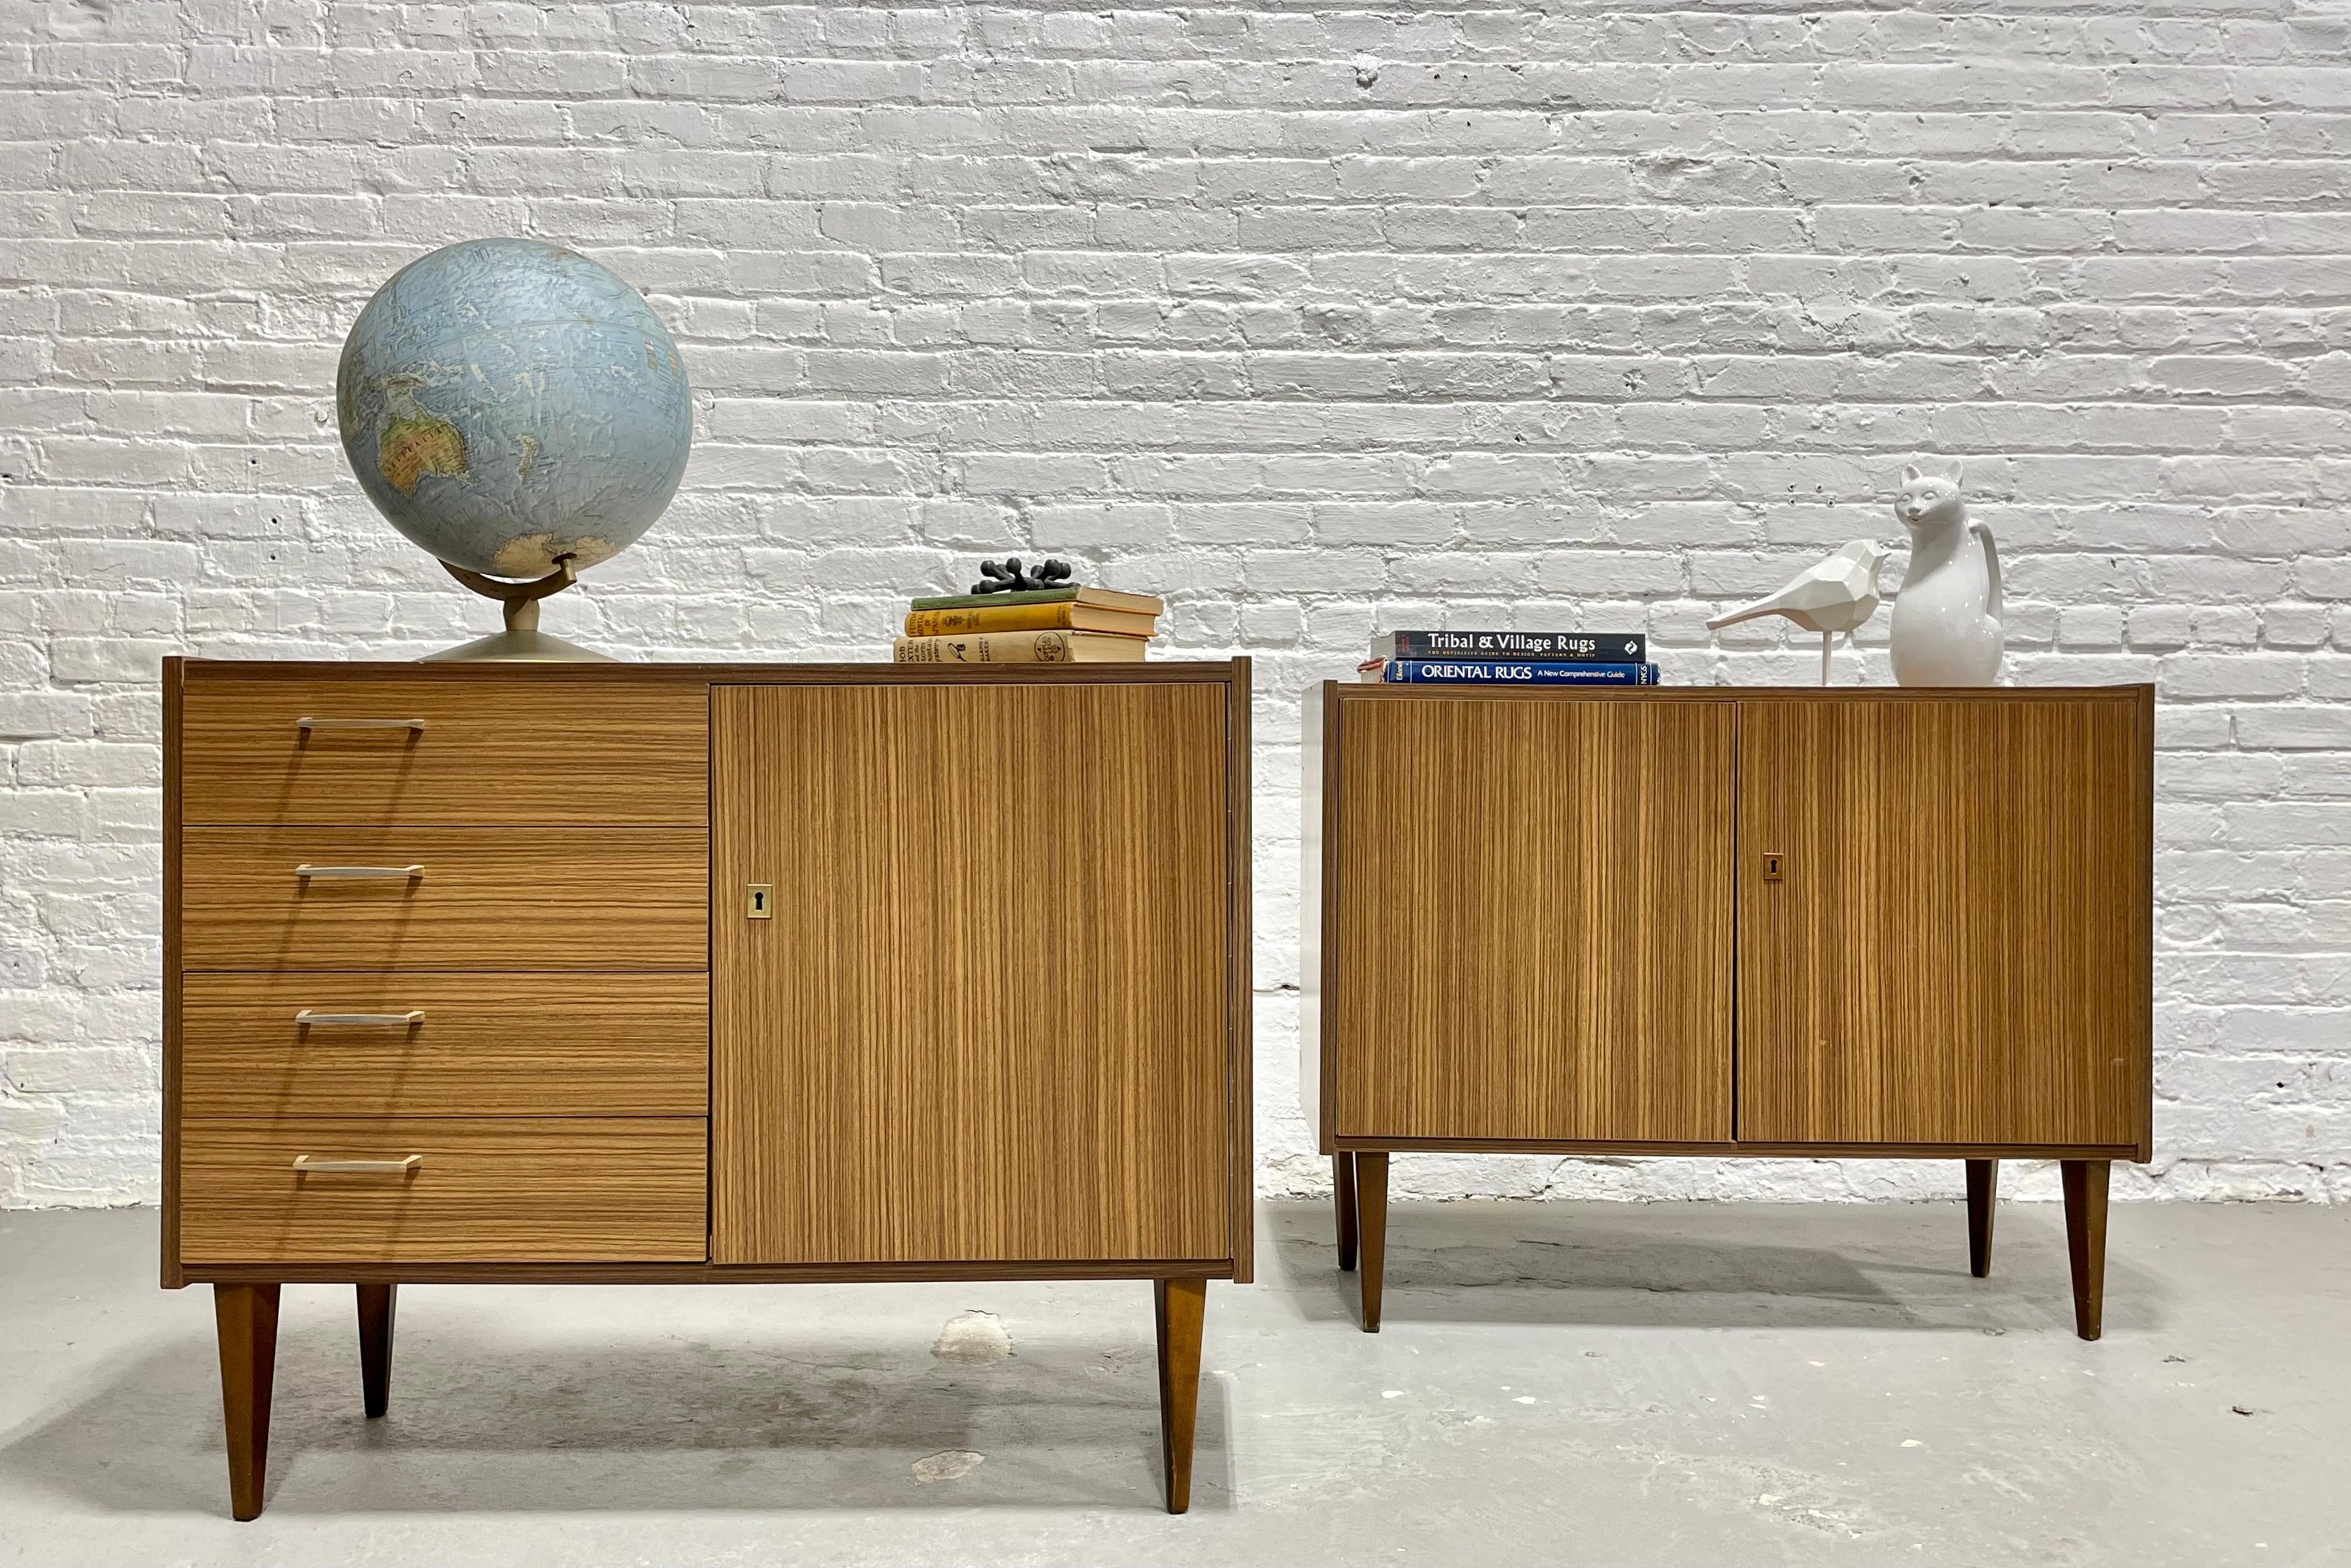 Perfect Pair of Mid Century Modern Laminate Petite credenzas / cabinets, Made in Germany, c. 1960's. Great option for those with smaller spaces yet needing the full offerings of a credenza or vinyl storage. Measurements are identical yet one cabinet